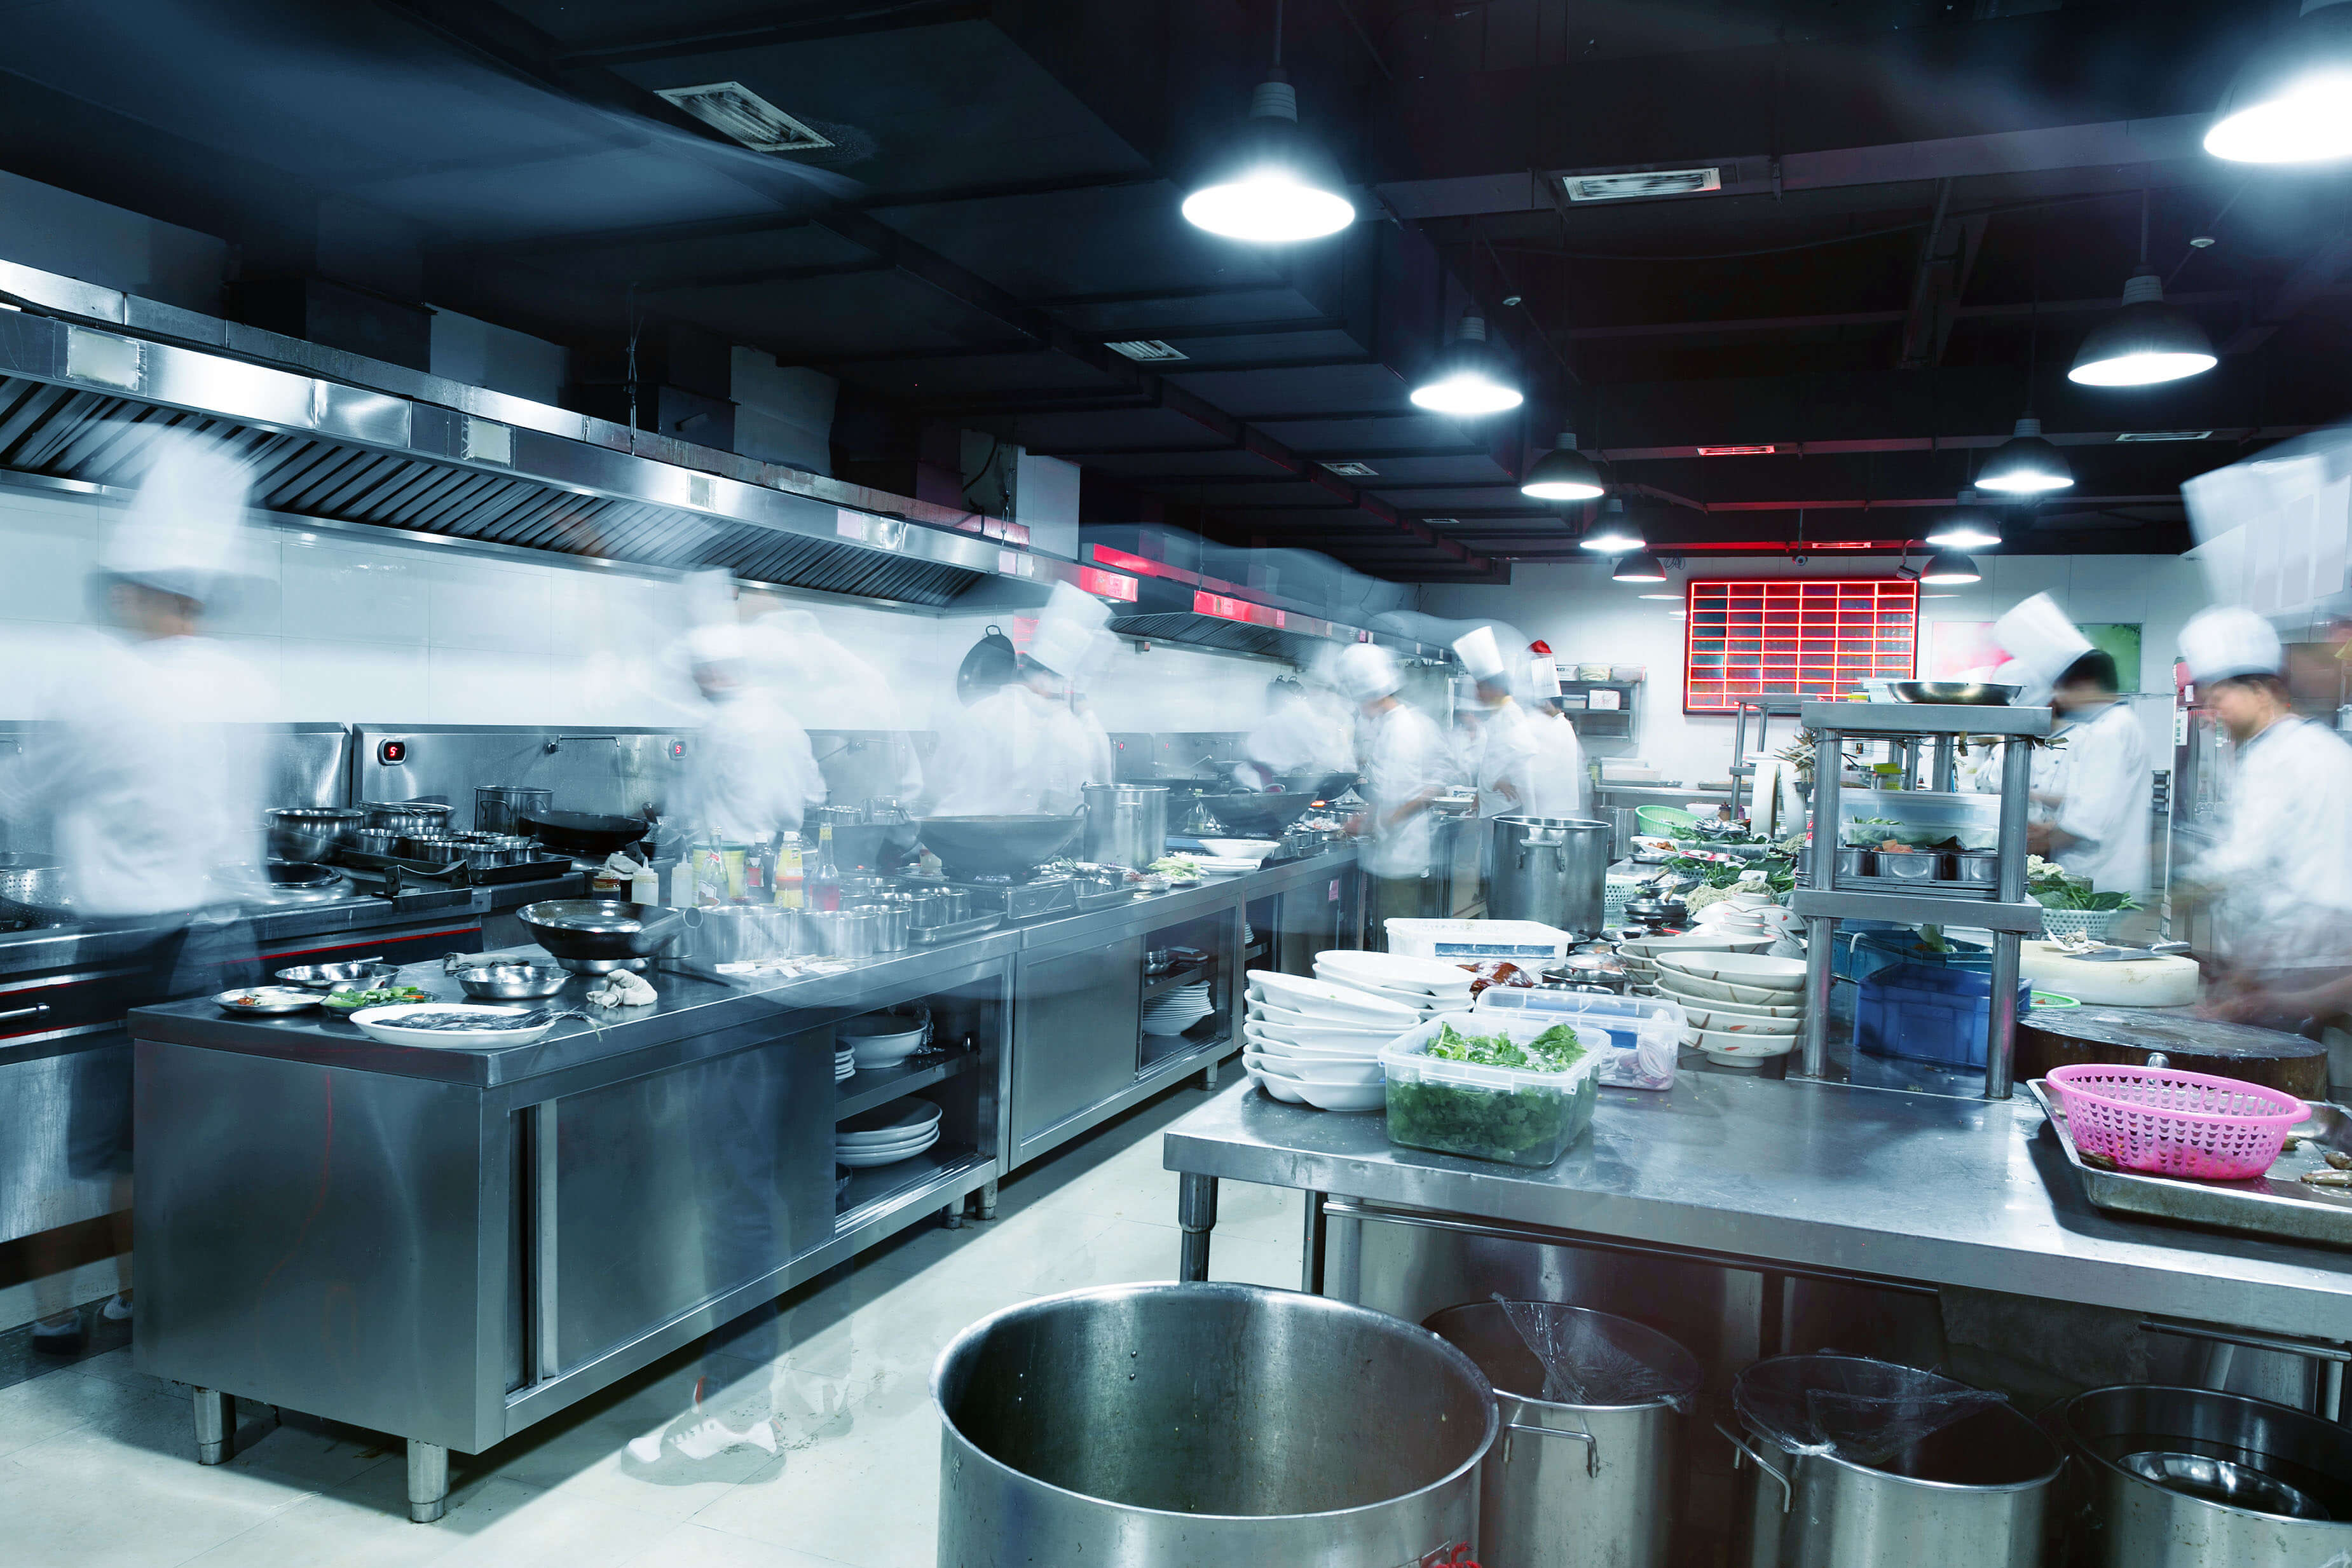 Antimicrobial Cladding Products For The Hospitality Industry